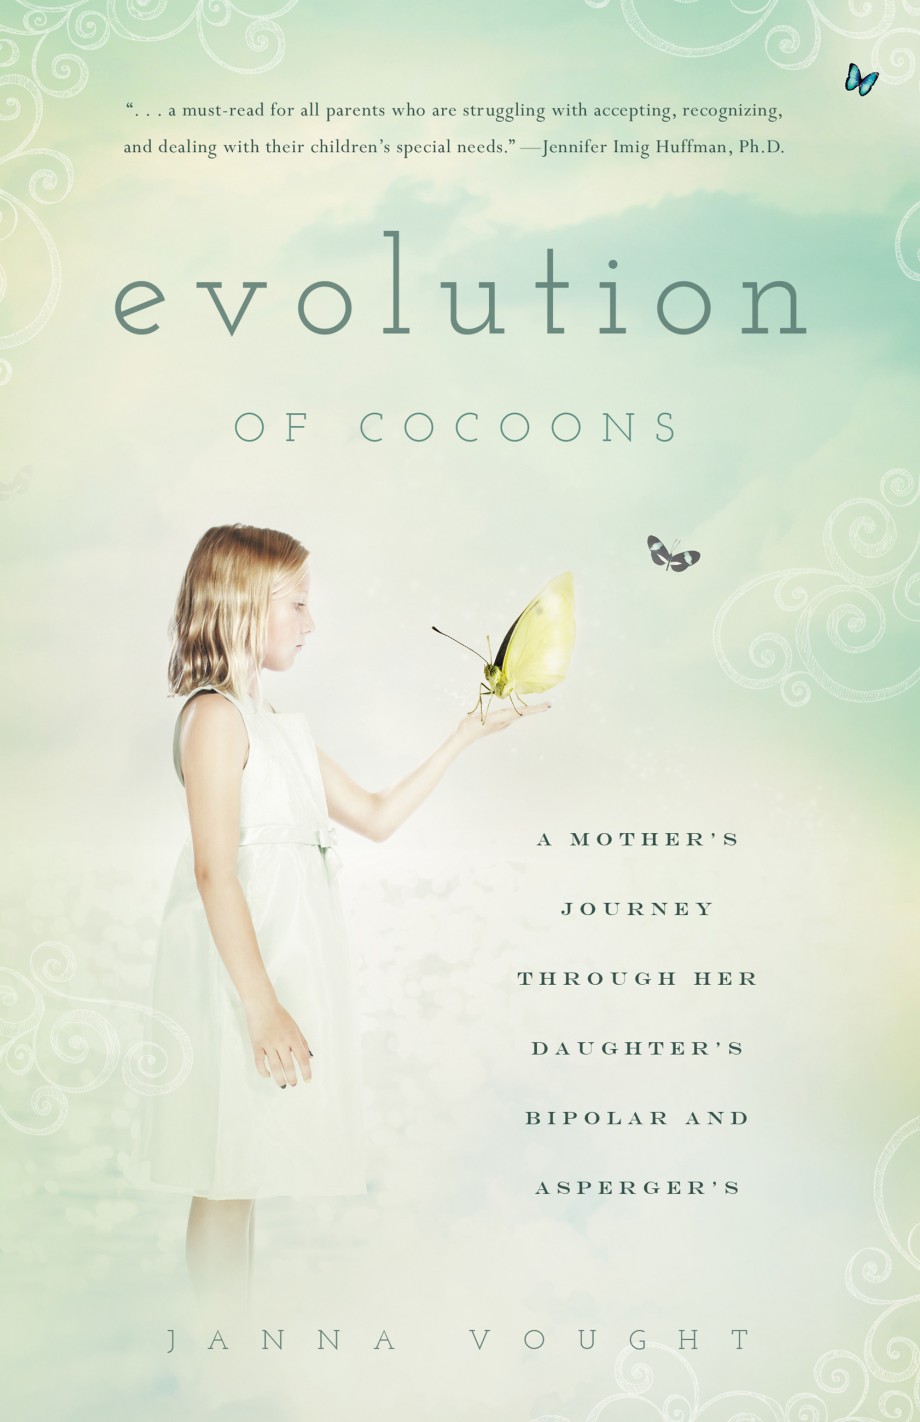 Evolution of Cocoons A Mother's Journey Through Her Daughter's Mental Illness and Asperger's